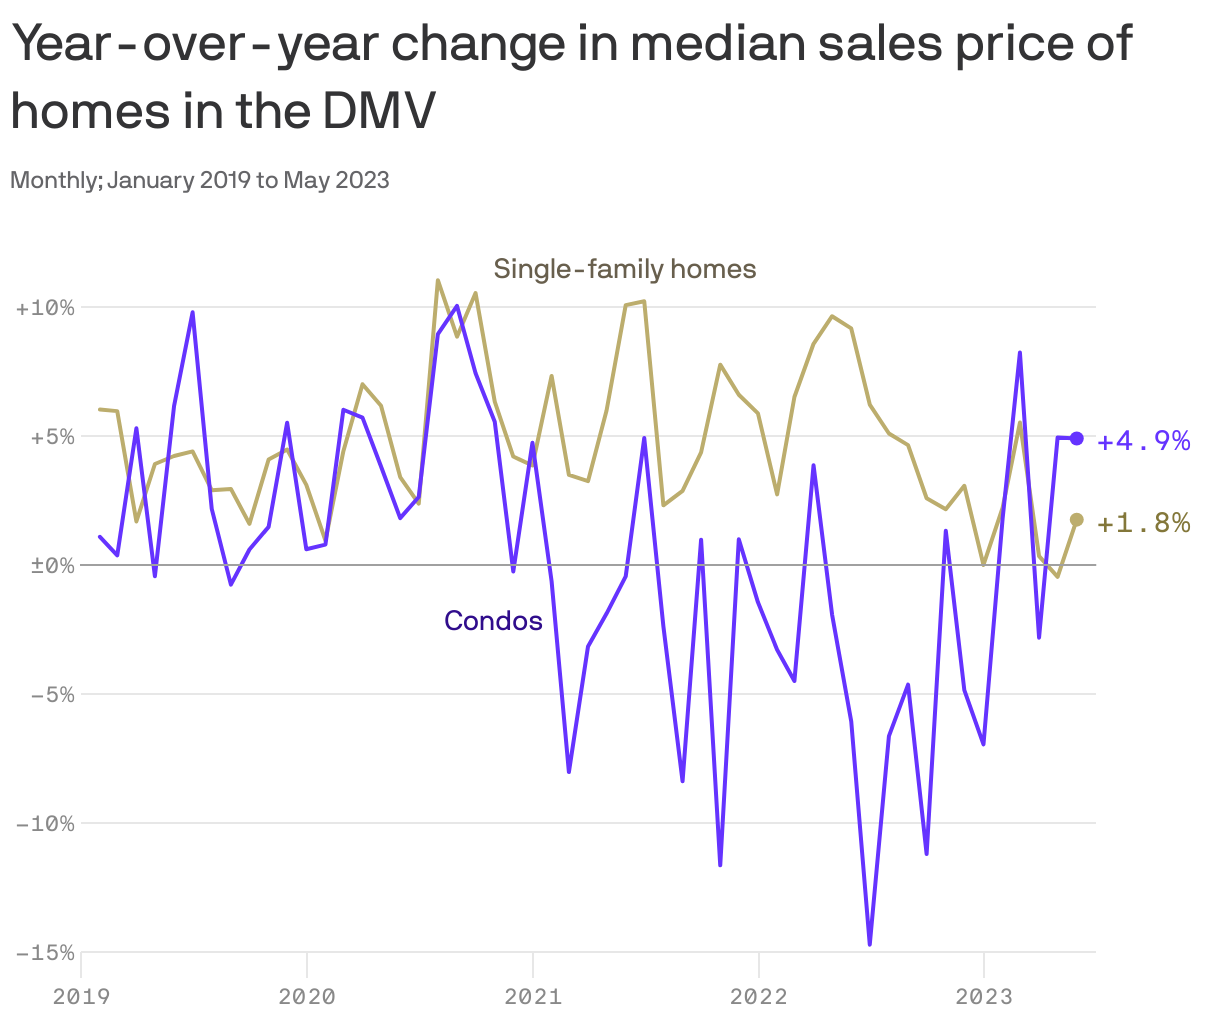 Year-over-year change in median sales price of homes in the DMV